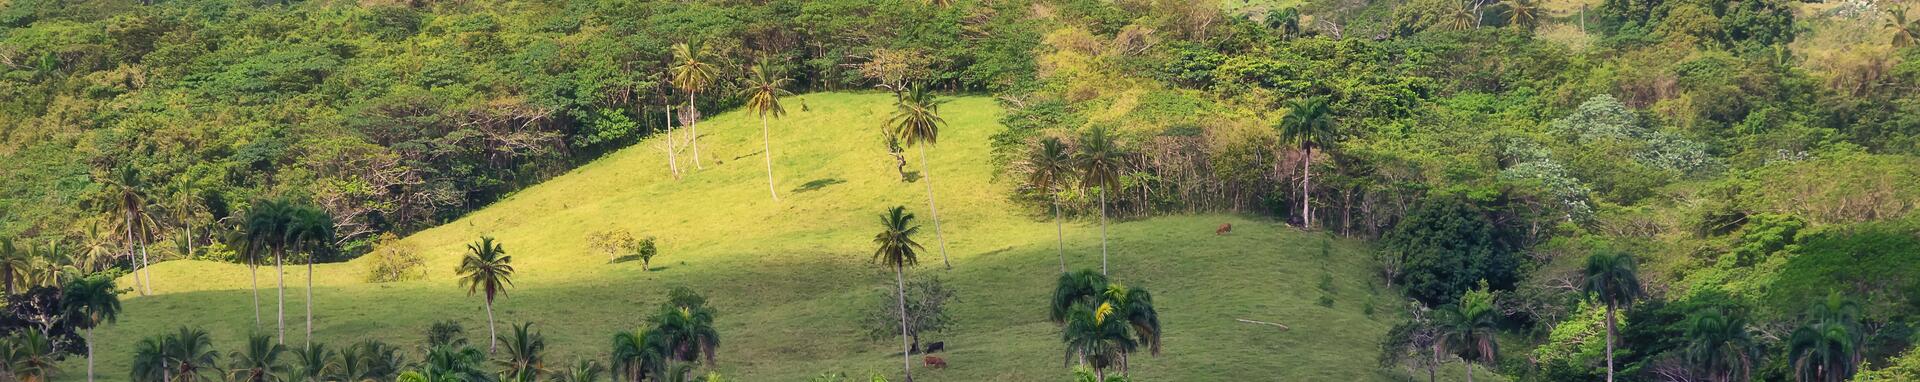 Pastureland and forest in the Dominican Republic